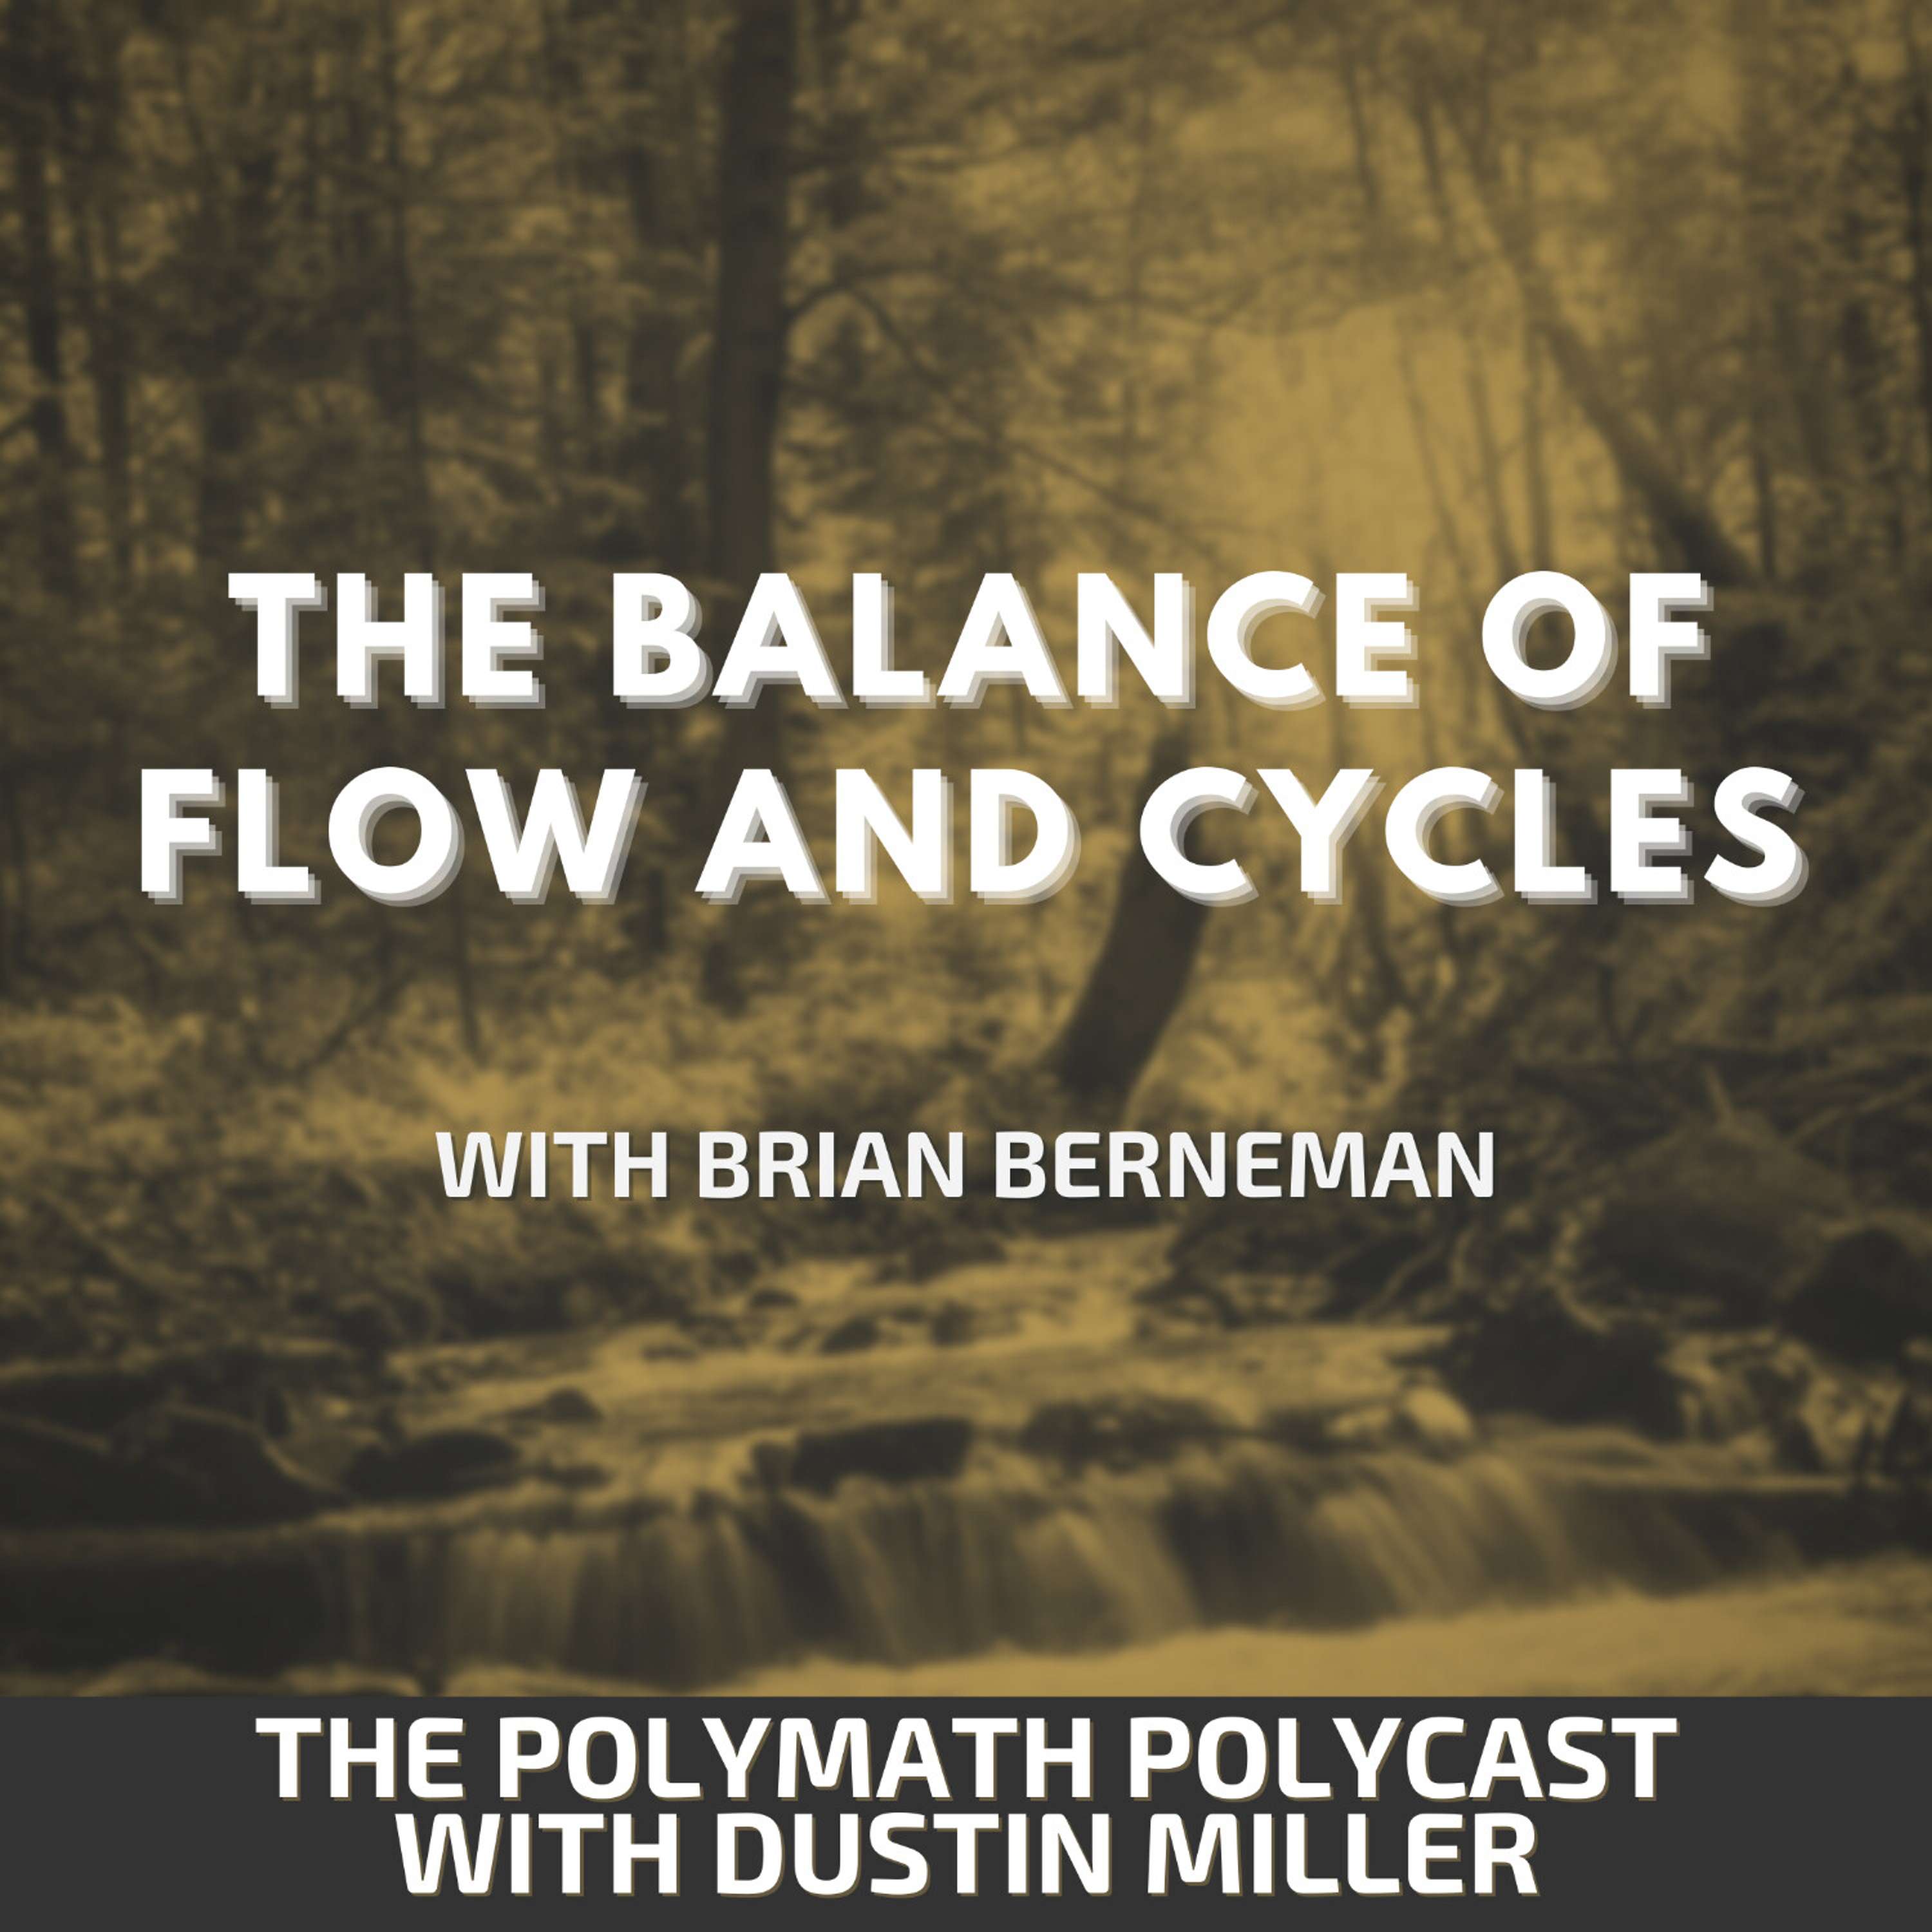 The Balance of Flow and Cycles with Brian Berneman [Interview]